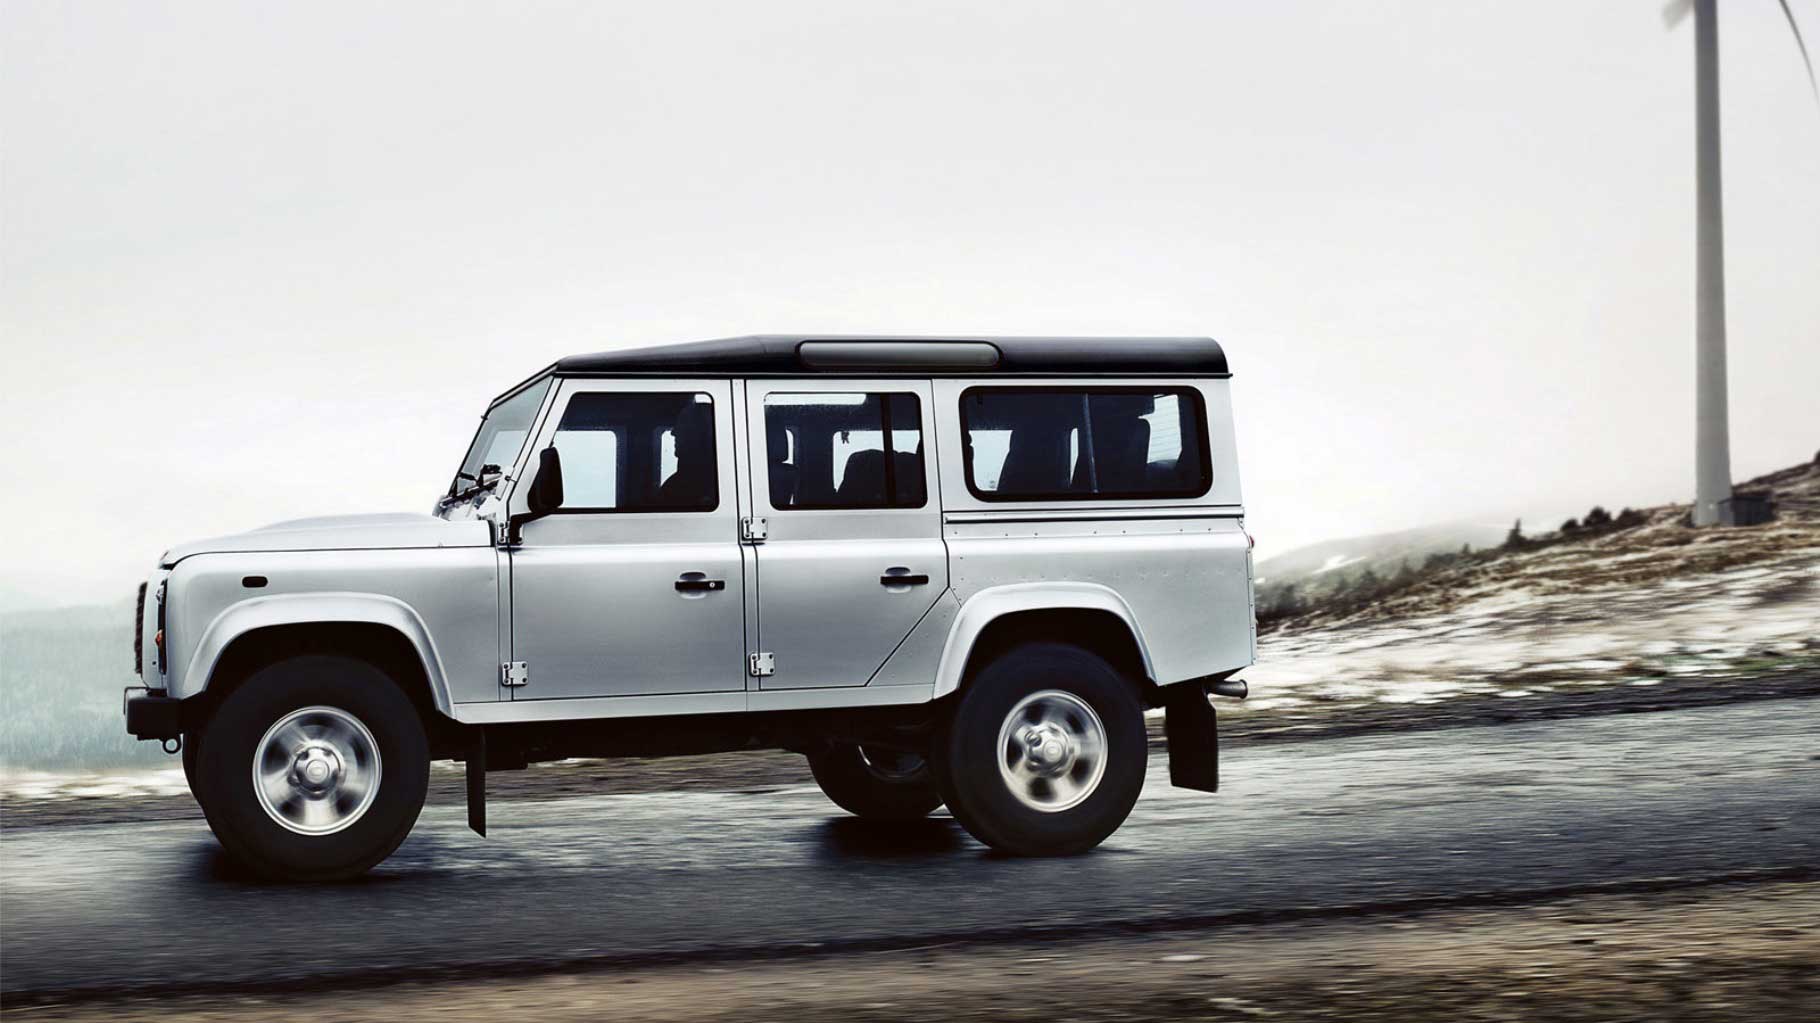 Land Rover Defender 110 side view